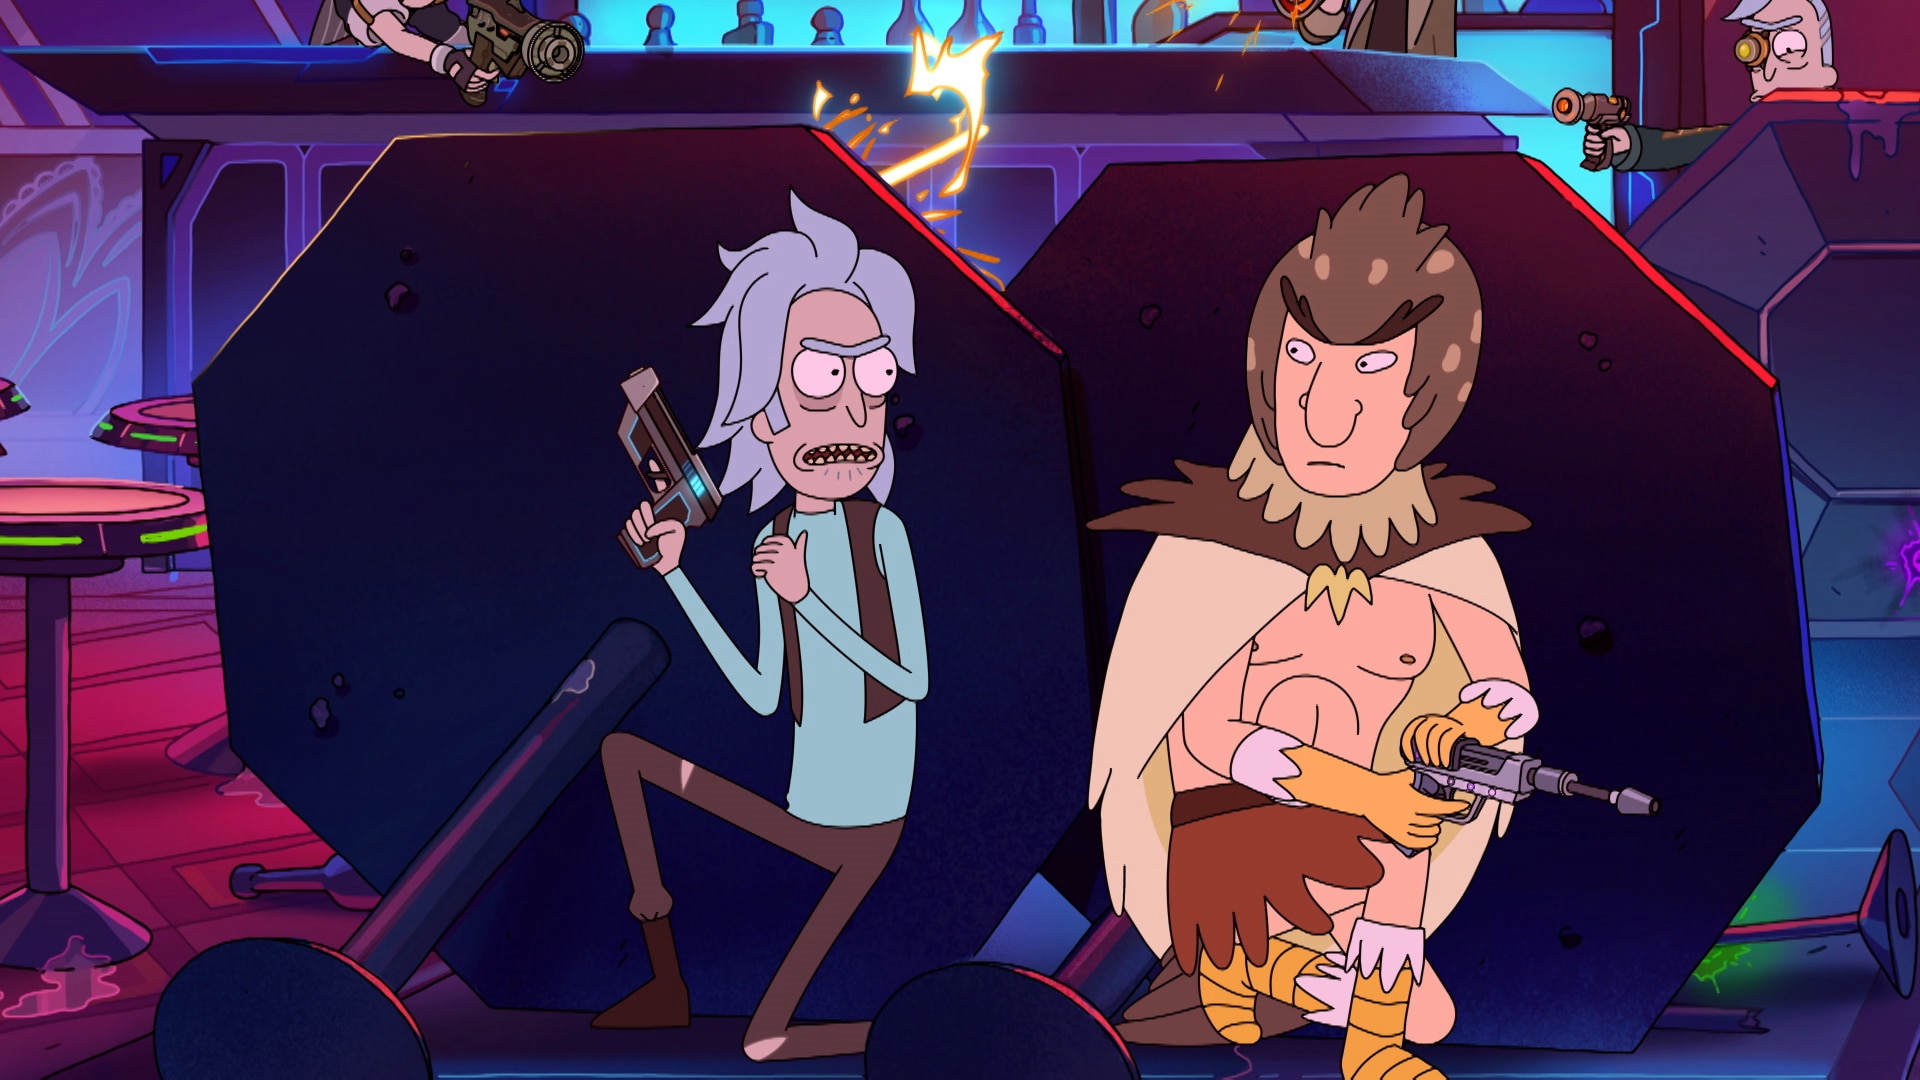 adult swim streaming rick and morty